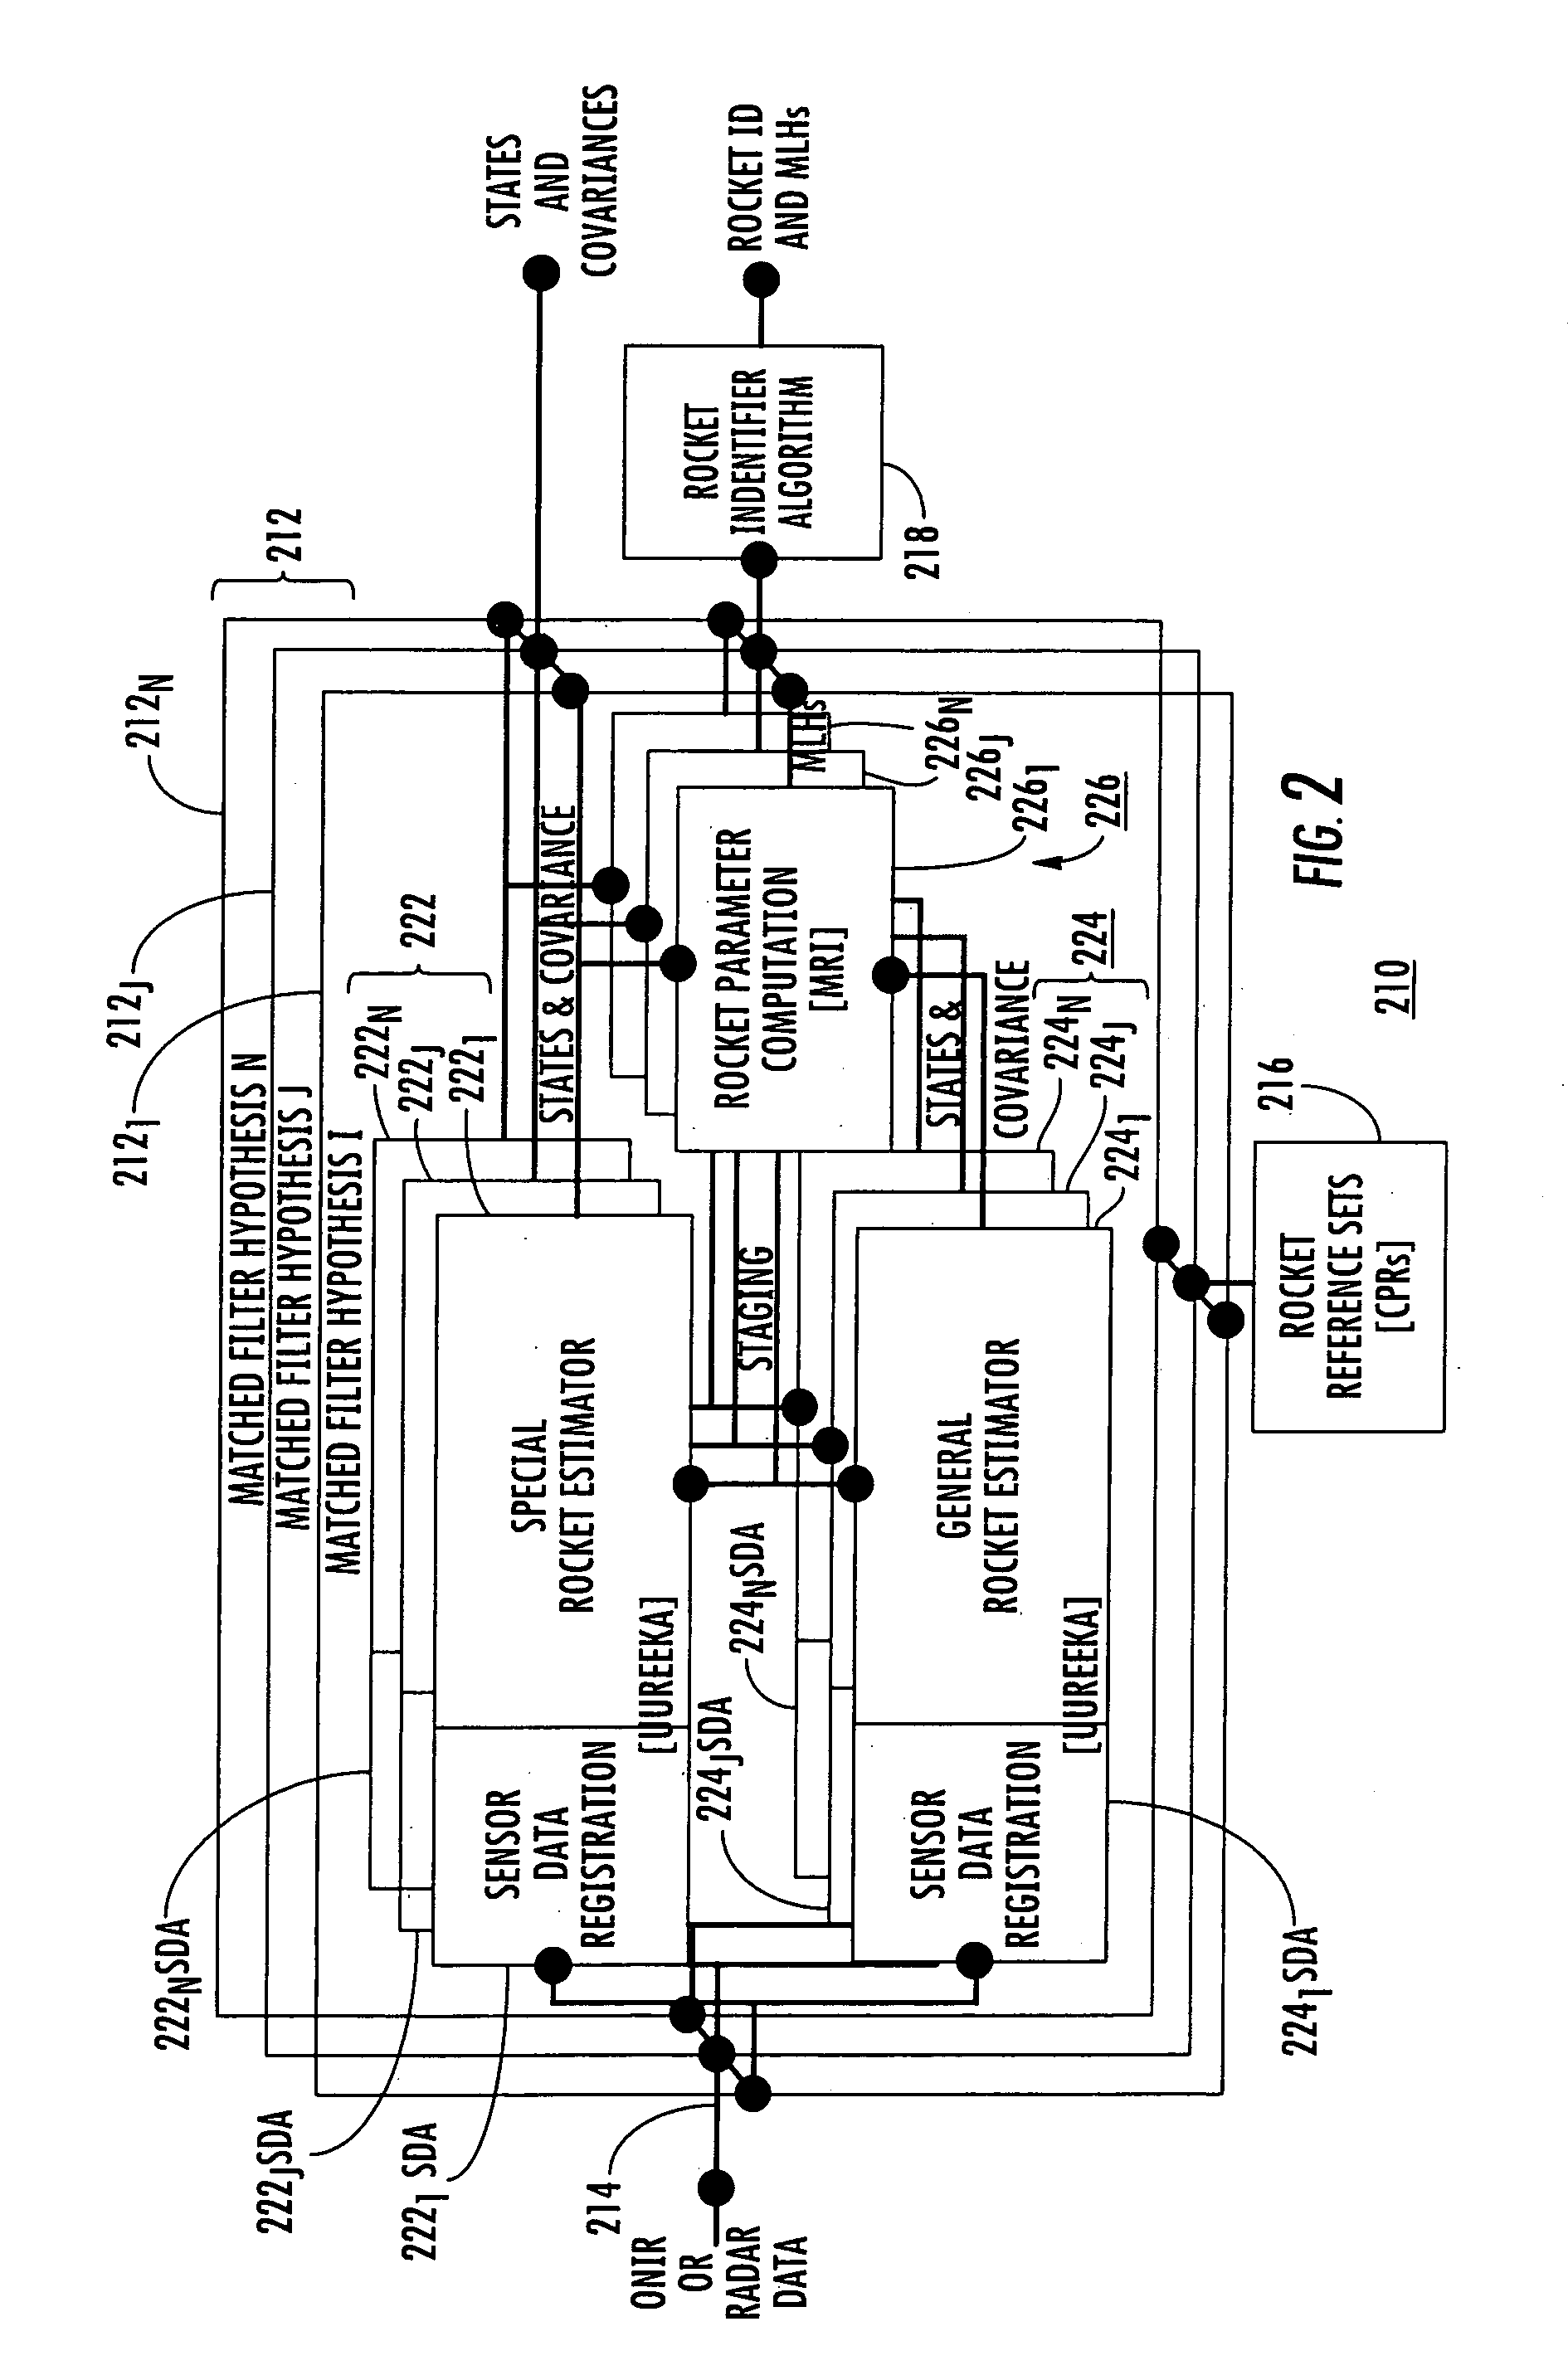 Missile identification and tracking system and method